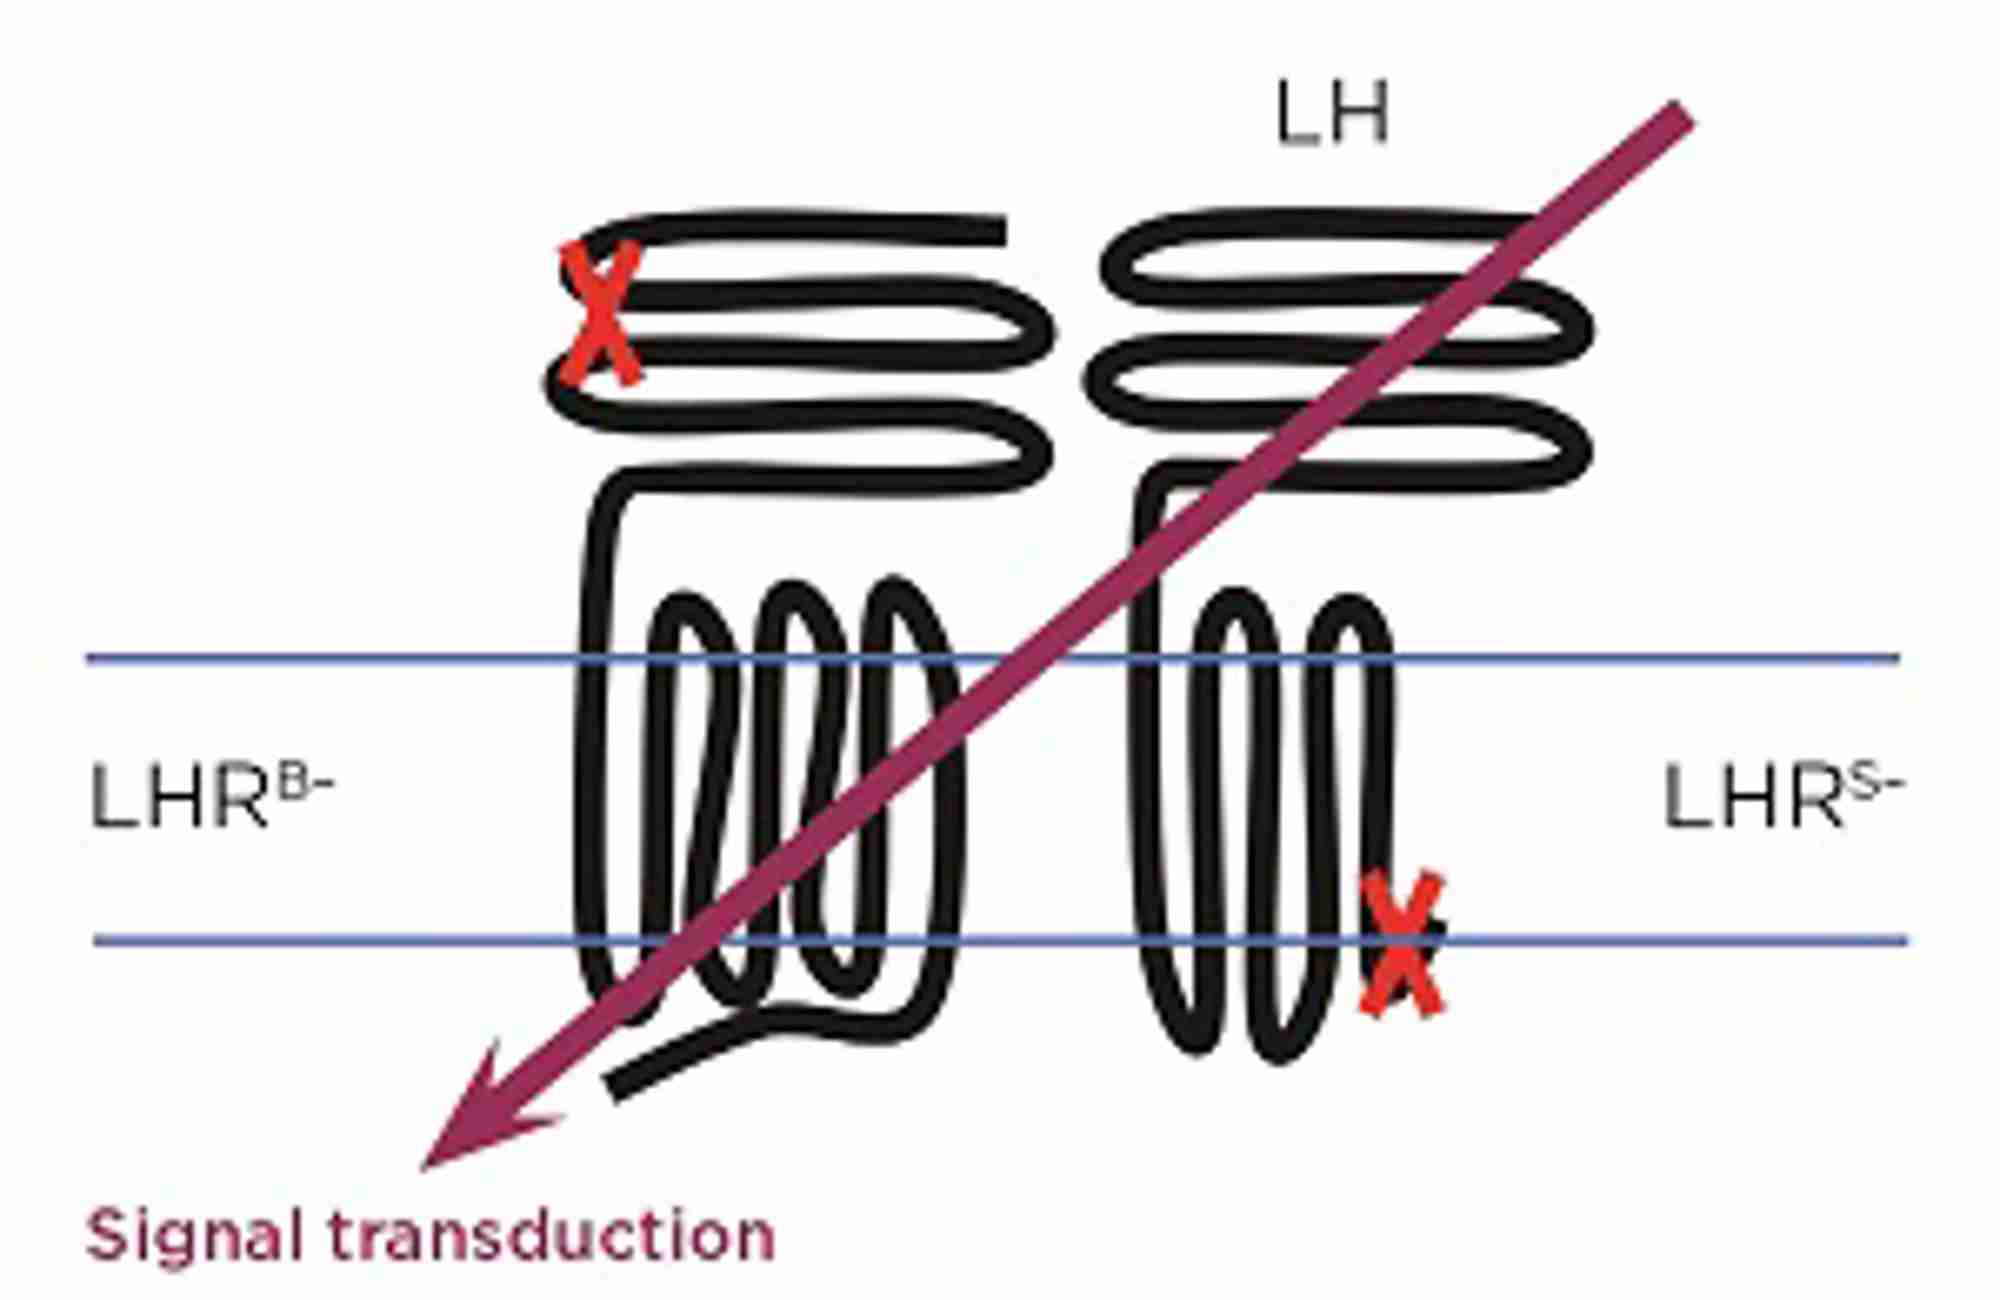 Figure 1. Schematic representation of LHR functional complementation. Co-expression of ligand-binding deficient LHR (LHRB–) and signalling deficient LHR (LHRS–) can restore LHR function via di/oligomerisation. Credit: K.Jonas